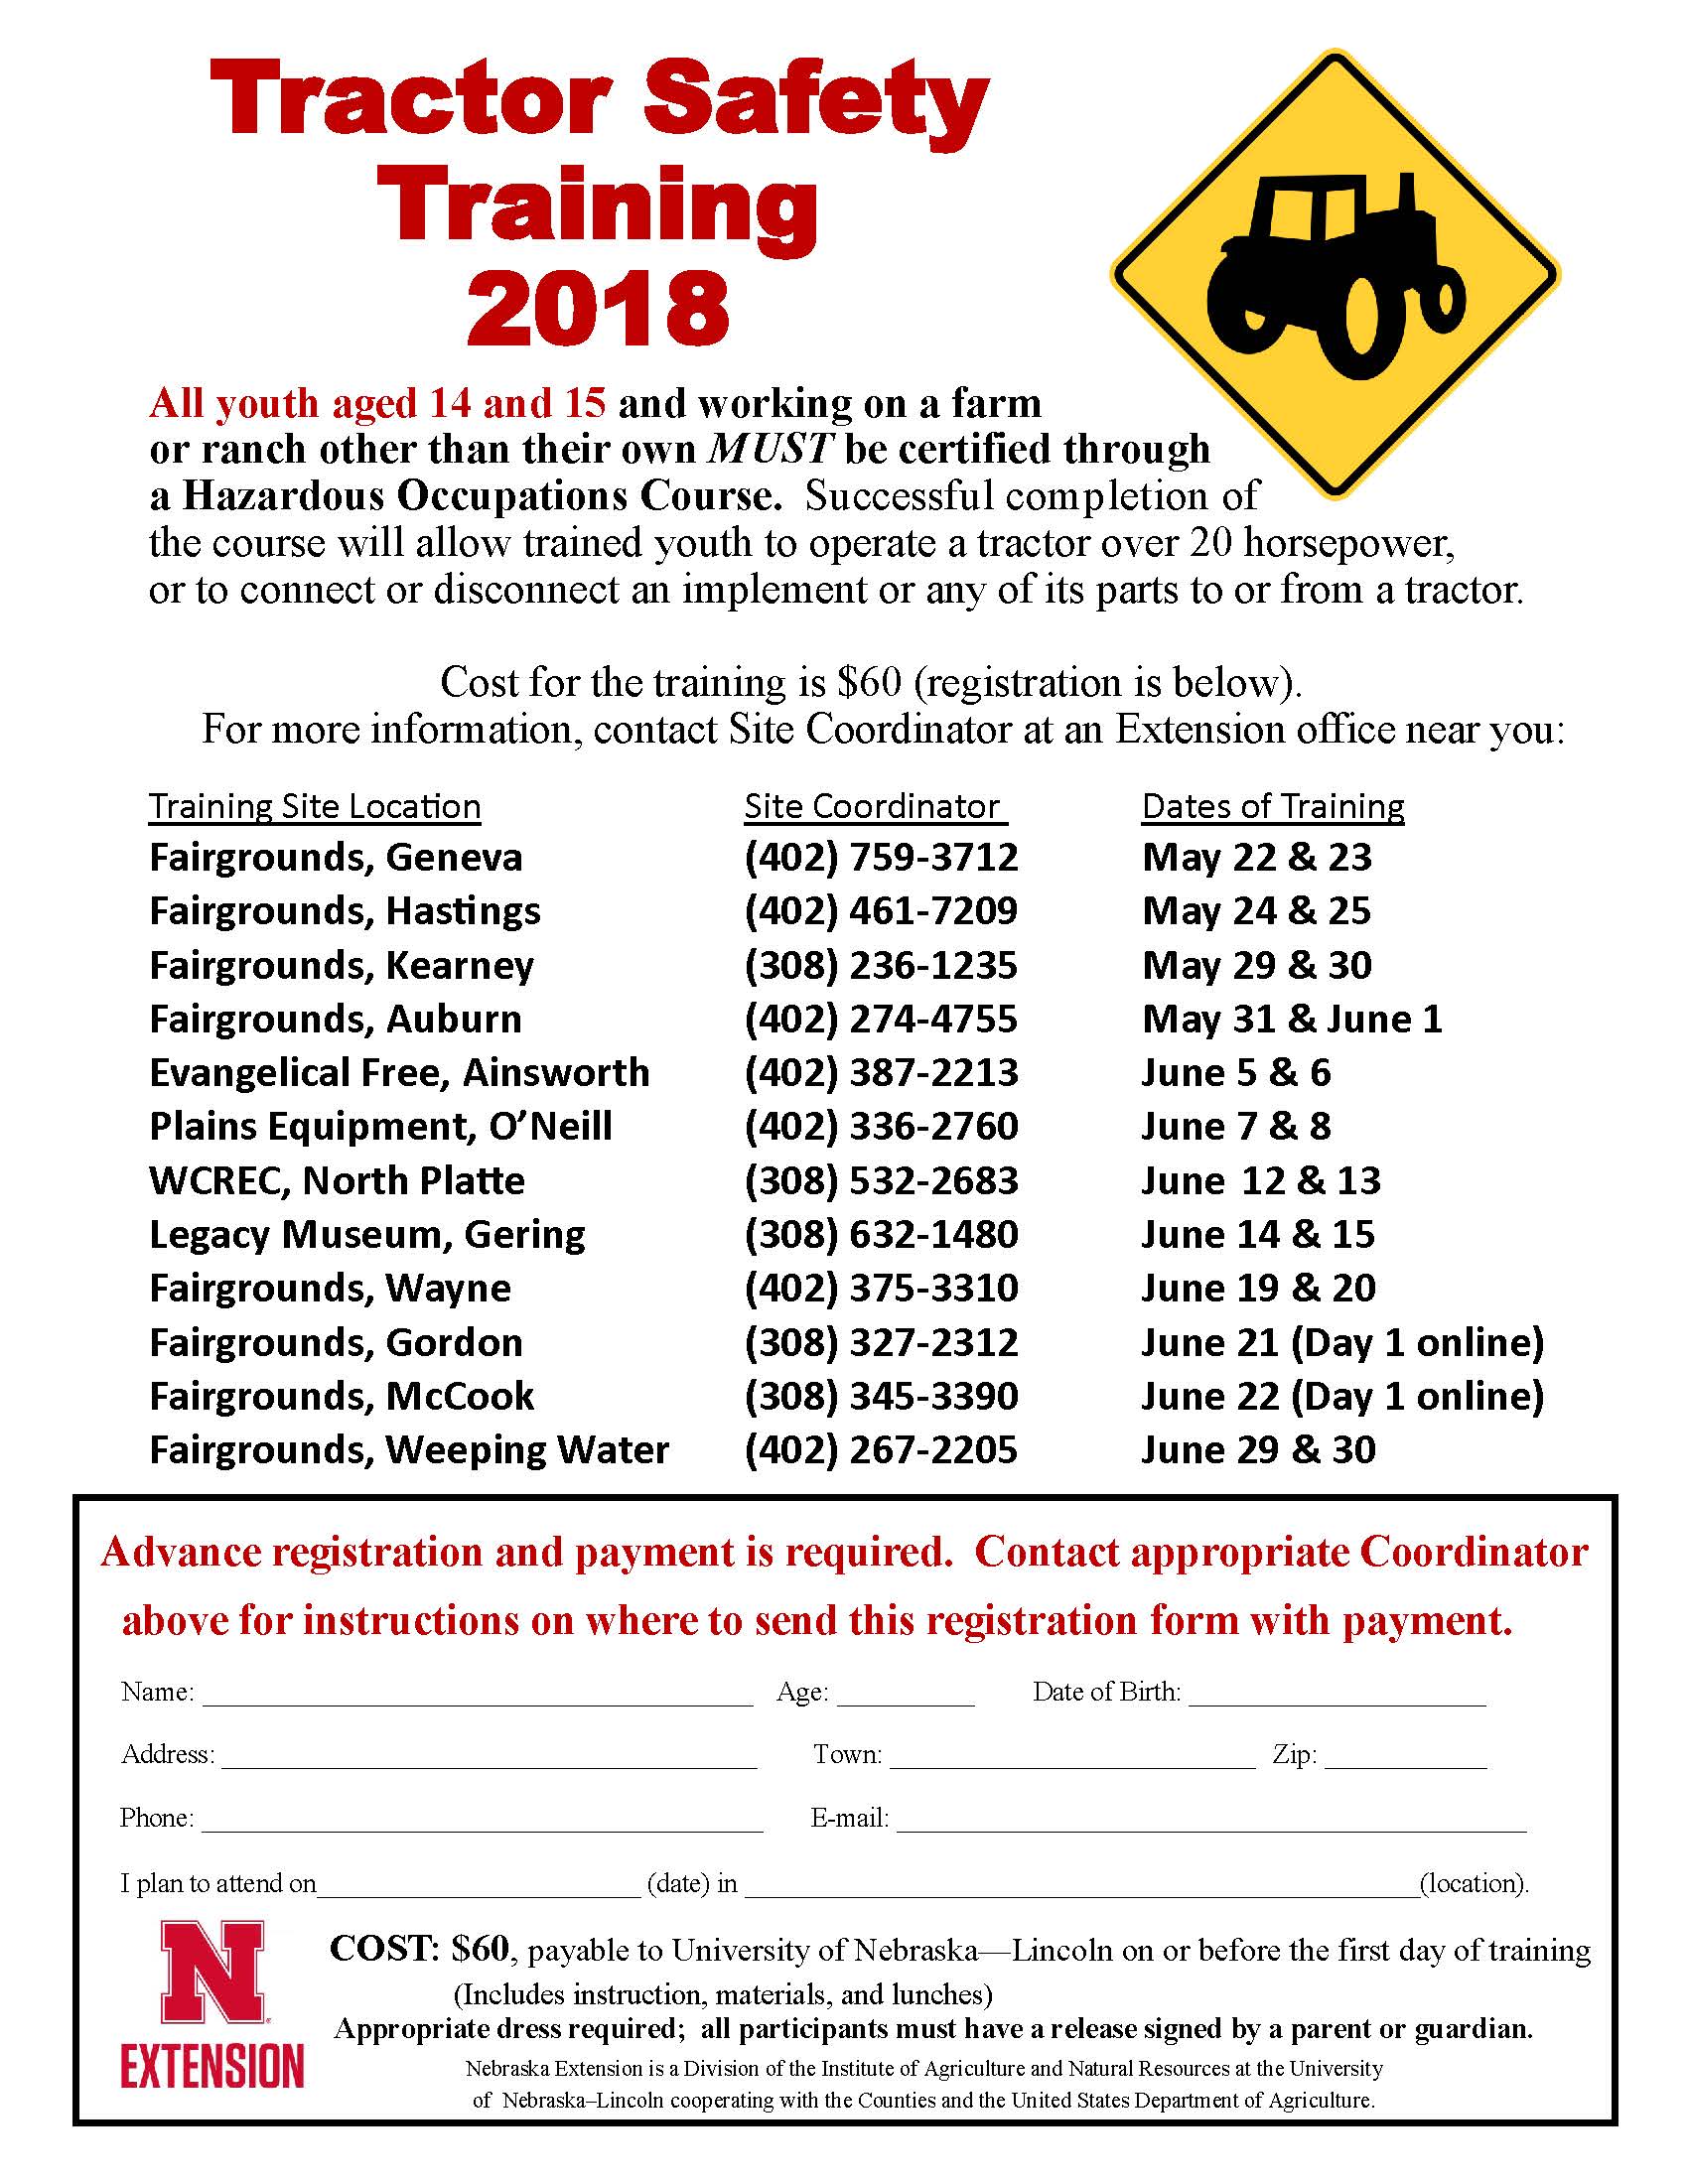 Tractor Safety Flier 2018 1